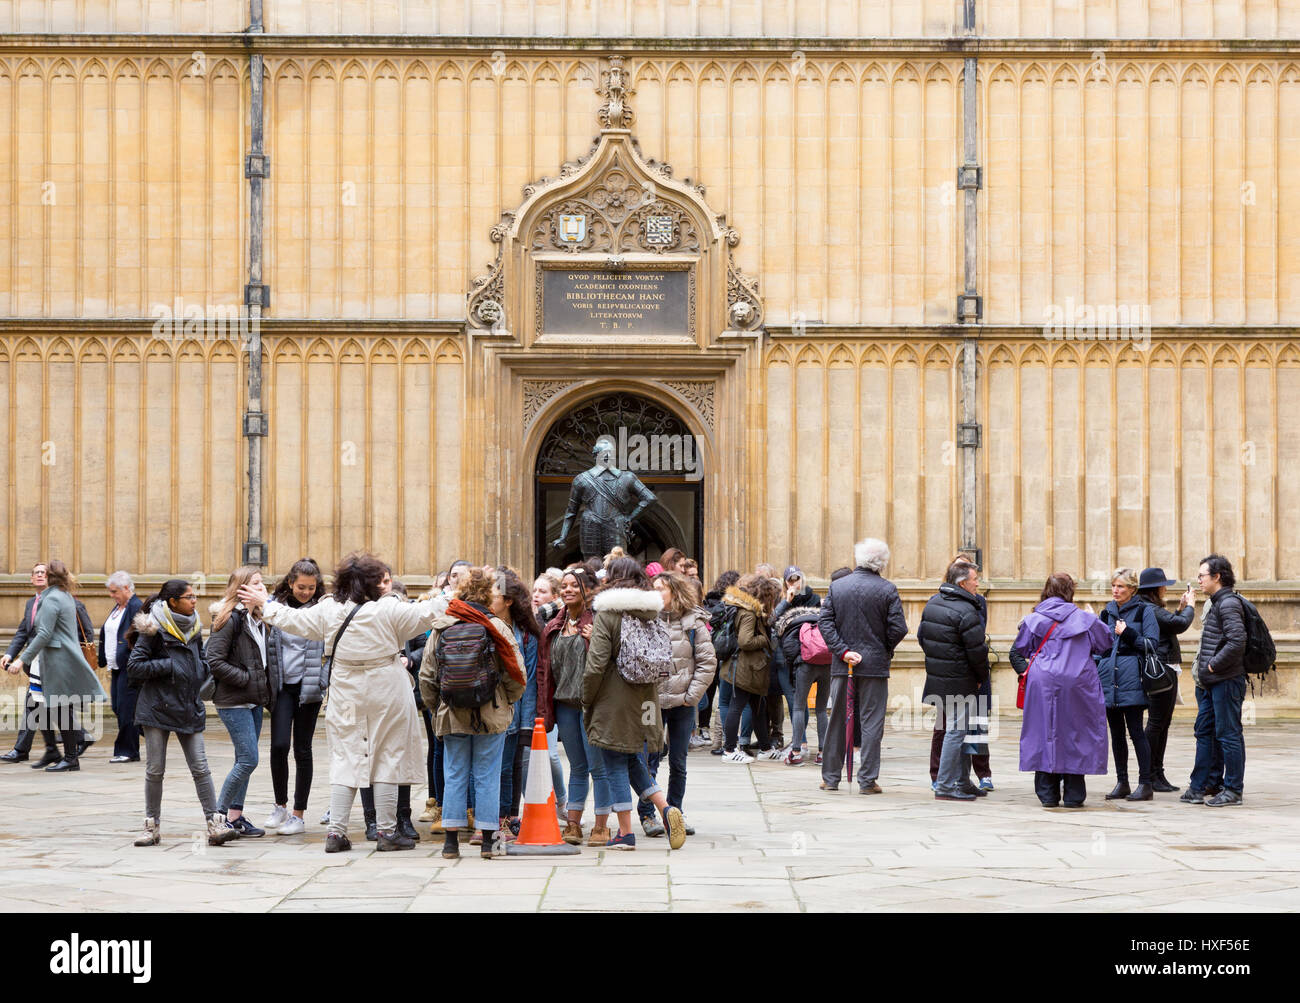 Bodleian Library Oxford tourism - tourists at the entrance to the Bodleian Library, Oxford UK Stock Photo